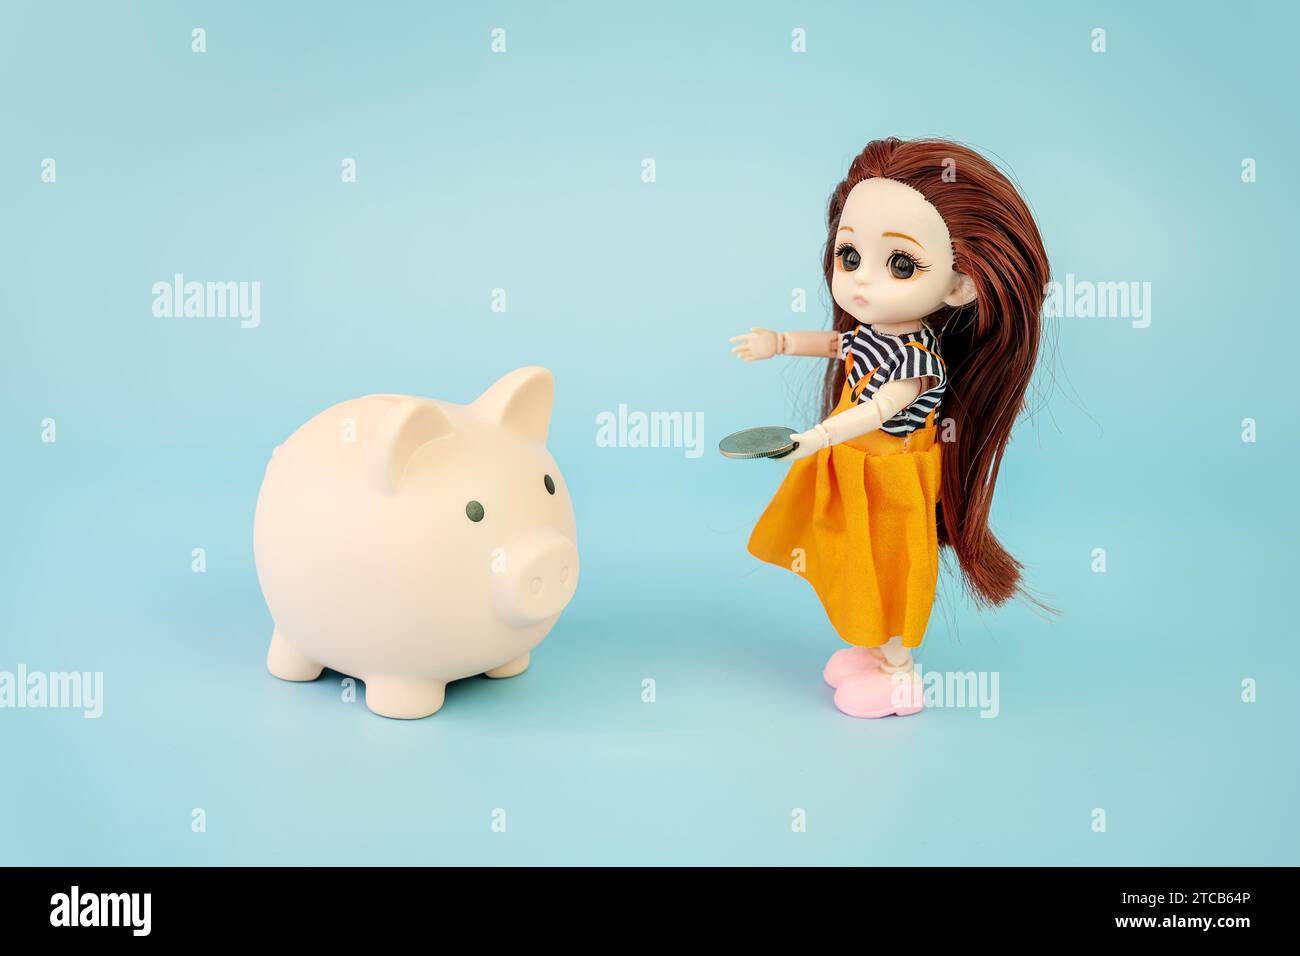 pink piggy bank and doll on a blue background. Concept of increasing income from bank accounts, savings. A small child doll with a coin in her hands o Stock Photo